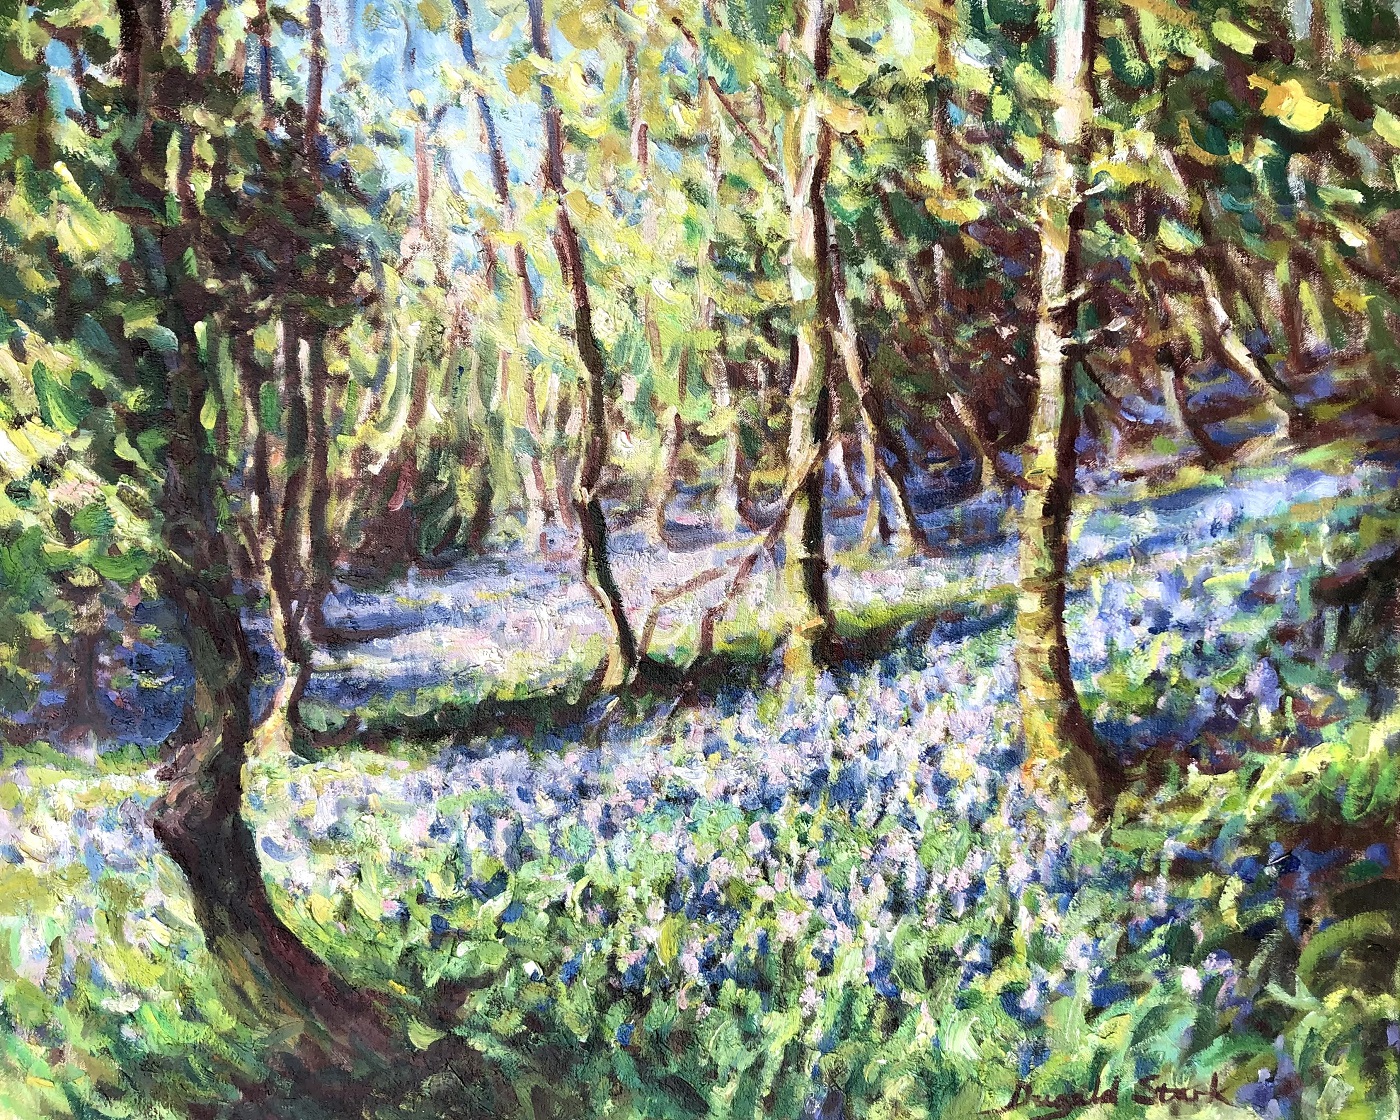 Image of a card painted by Dugald Stark called bluebell fields